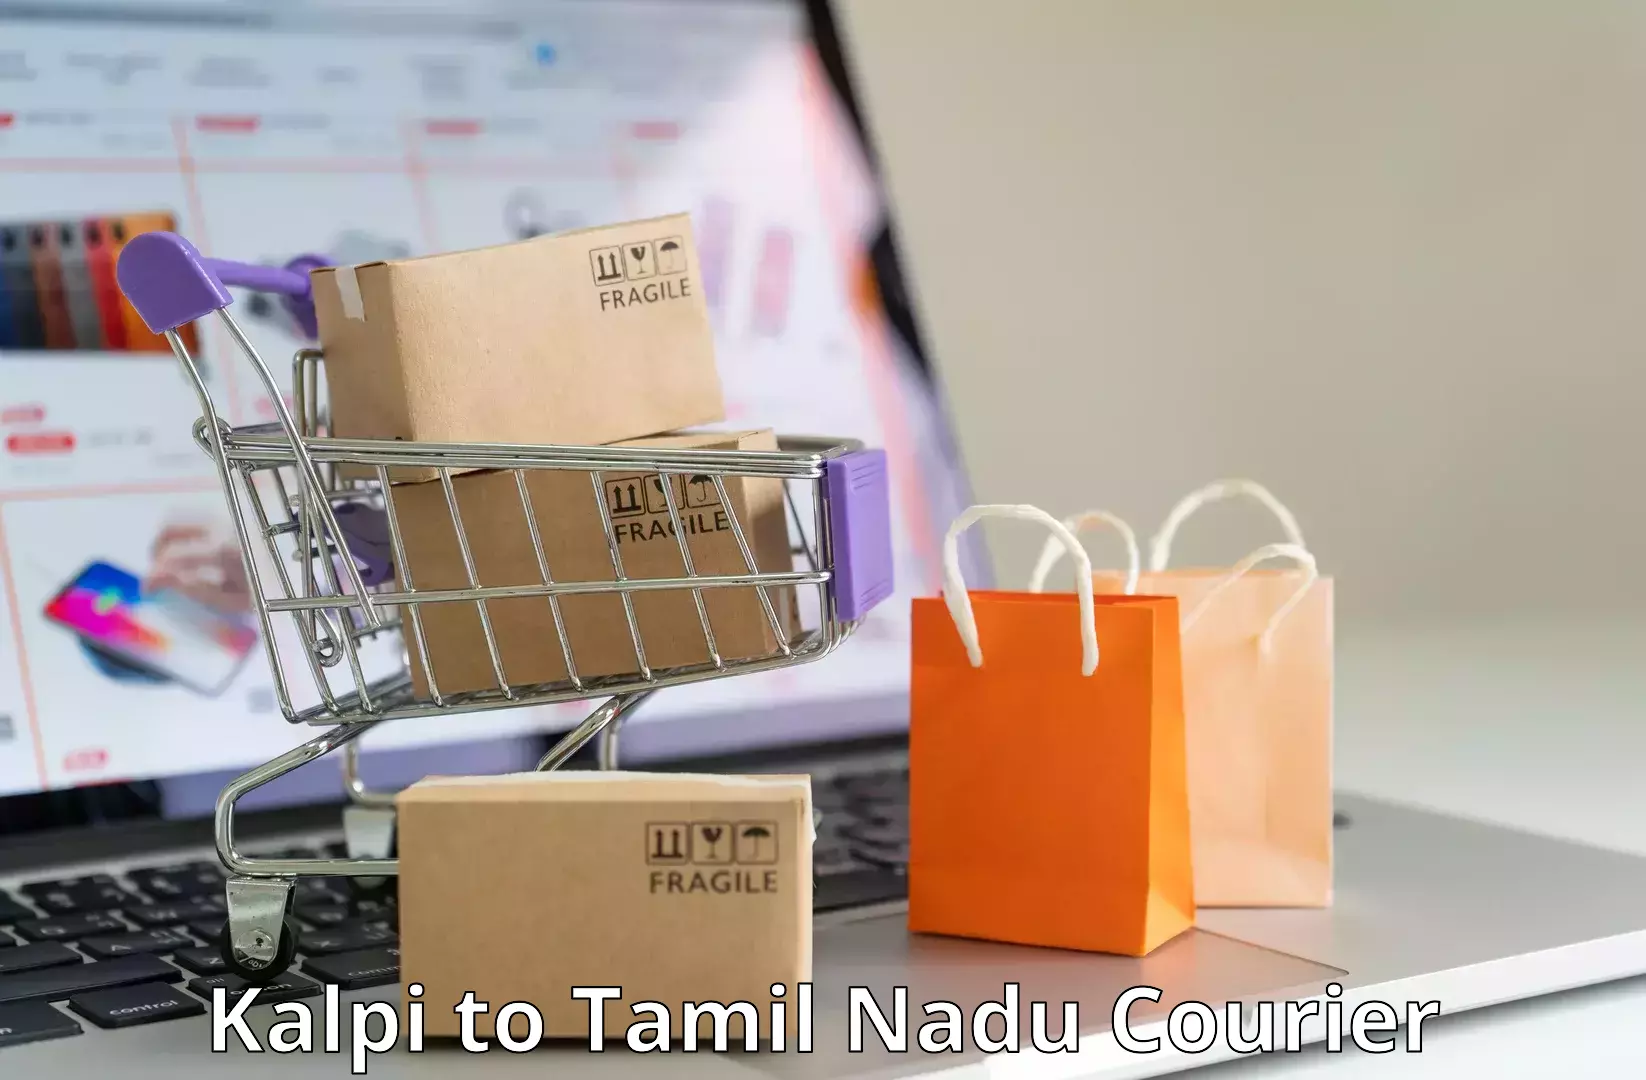 Trackable shipping service Kalpi to Vellore